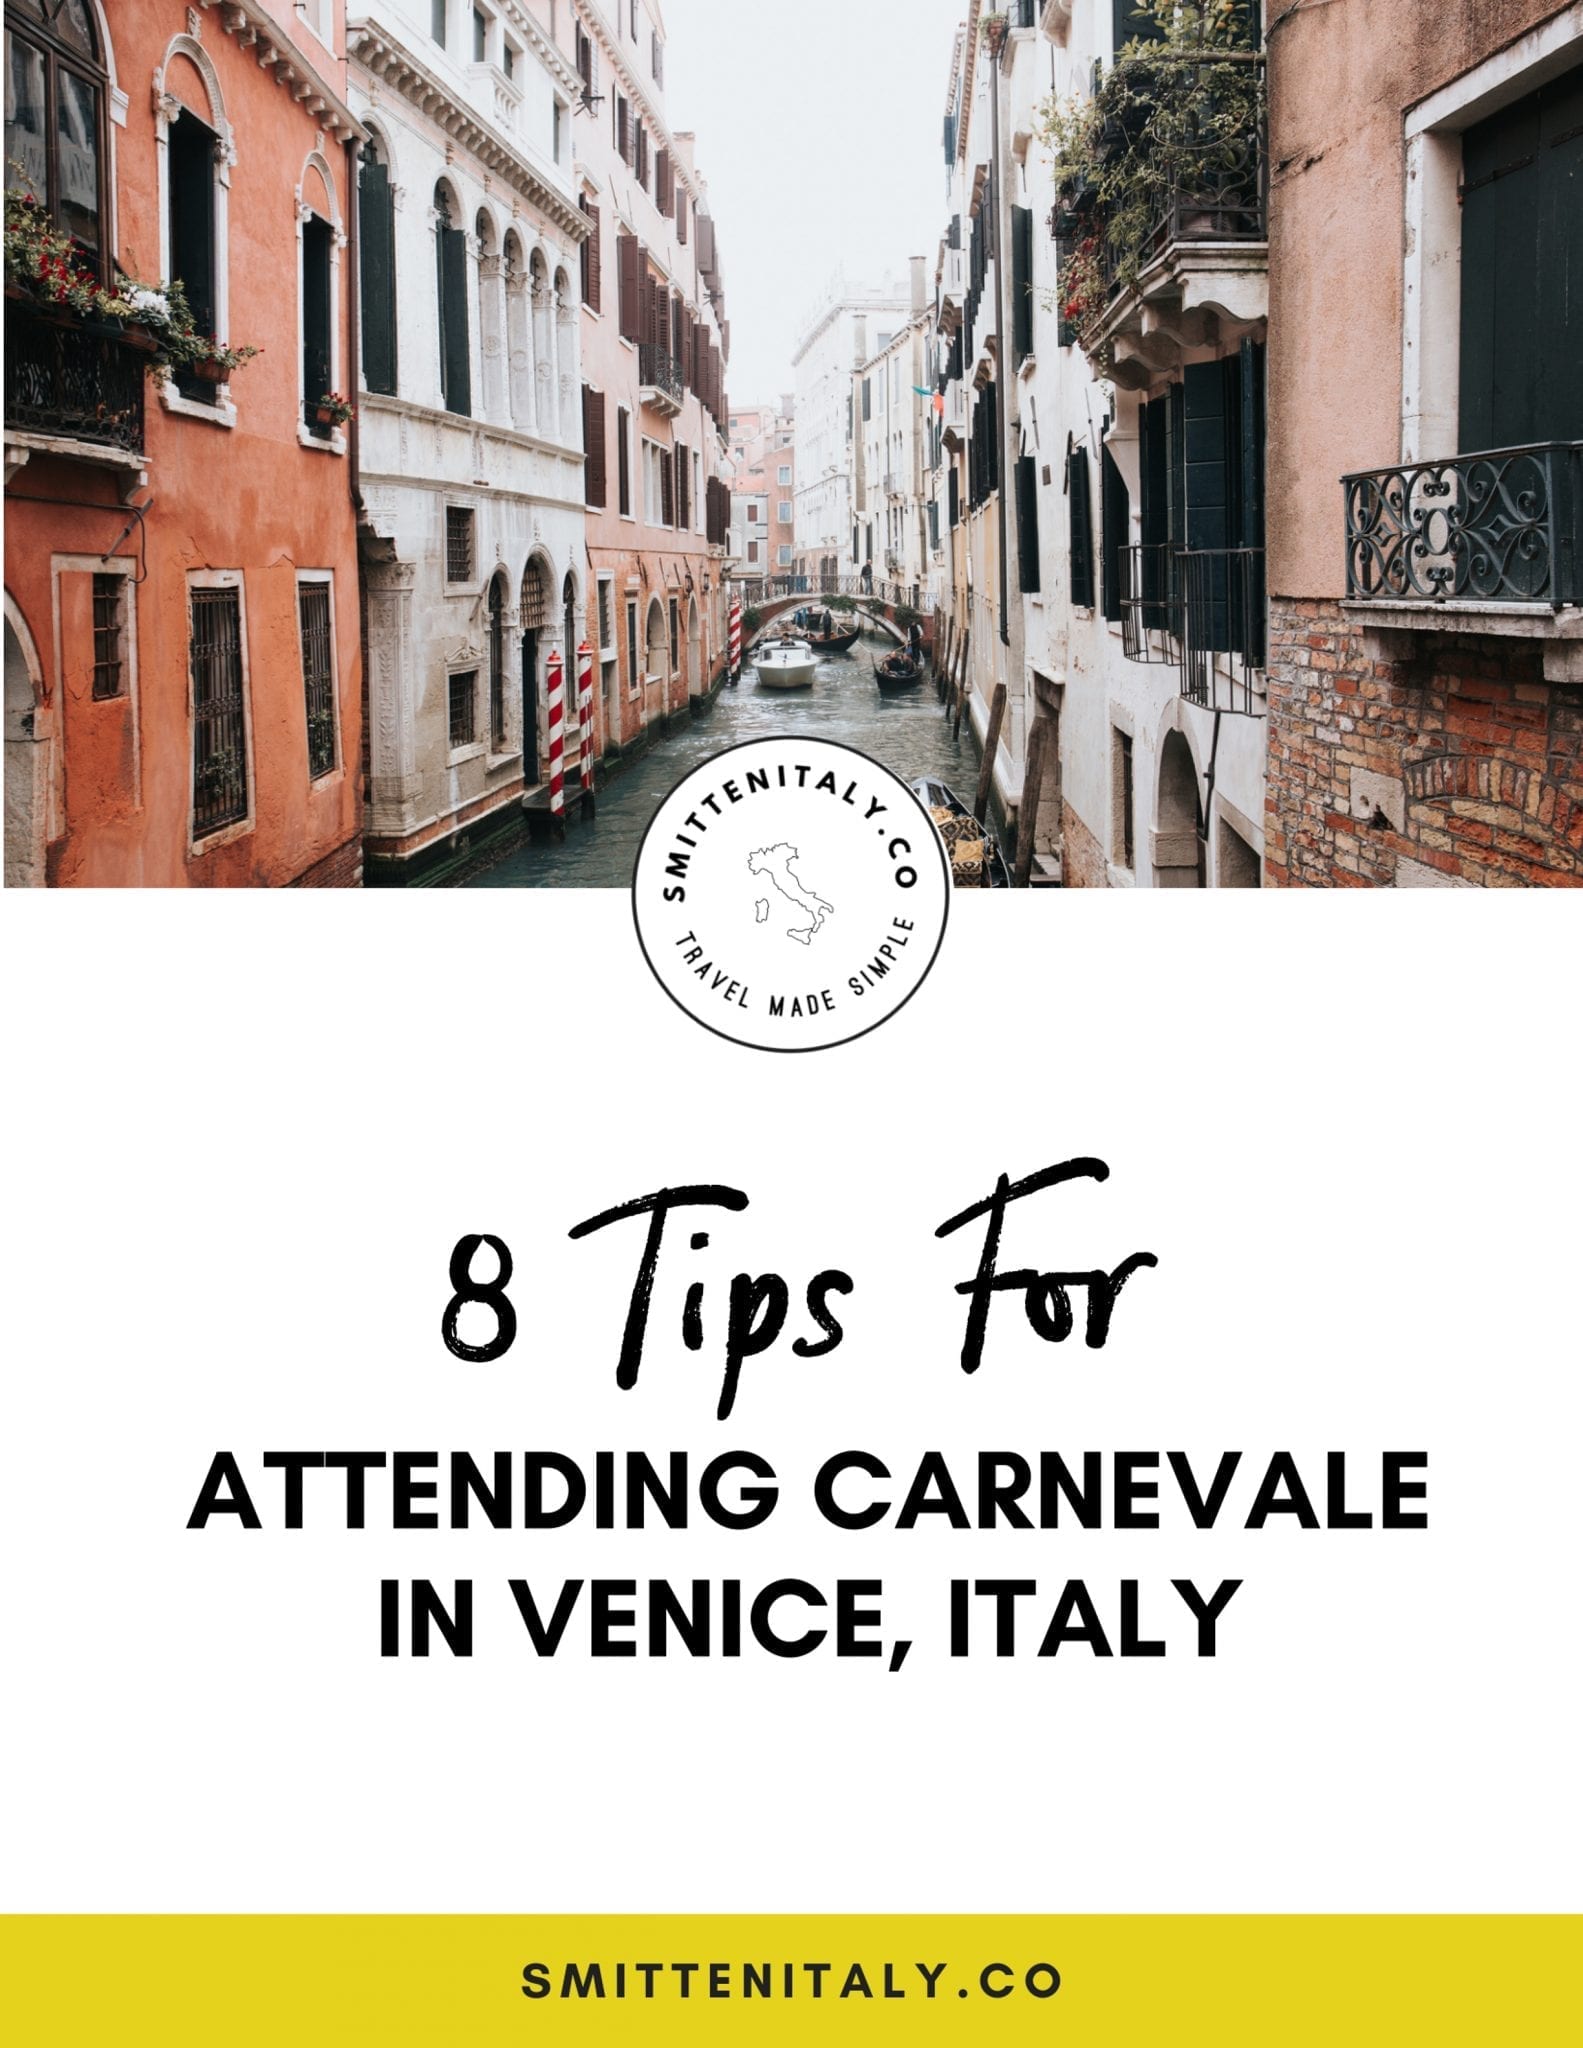 Tips for visiting Venice, Italy during carnevale.